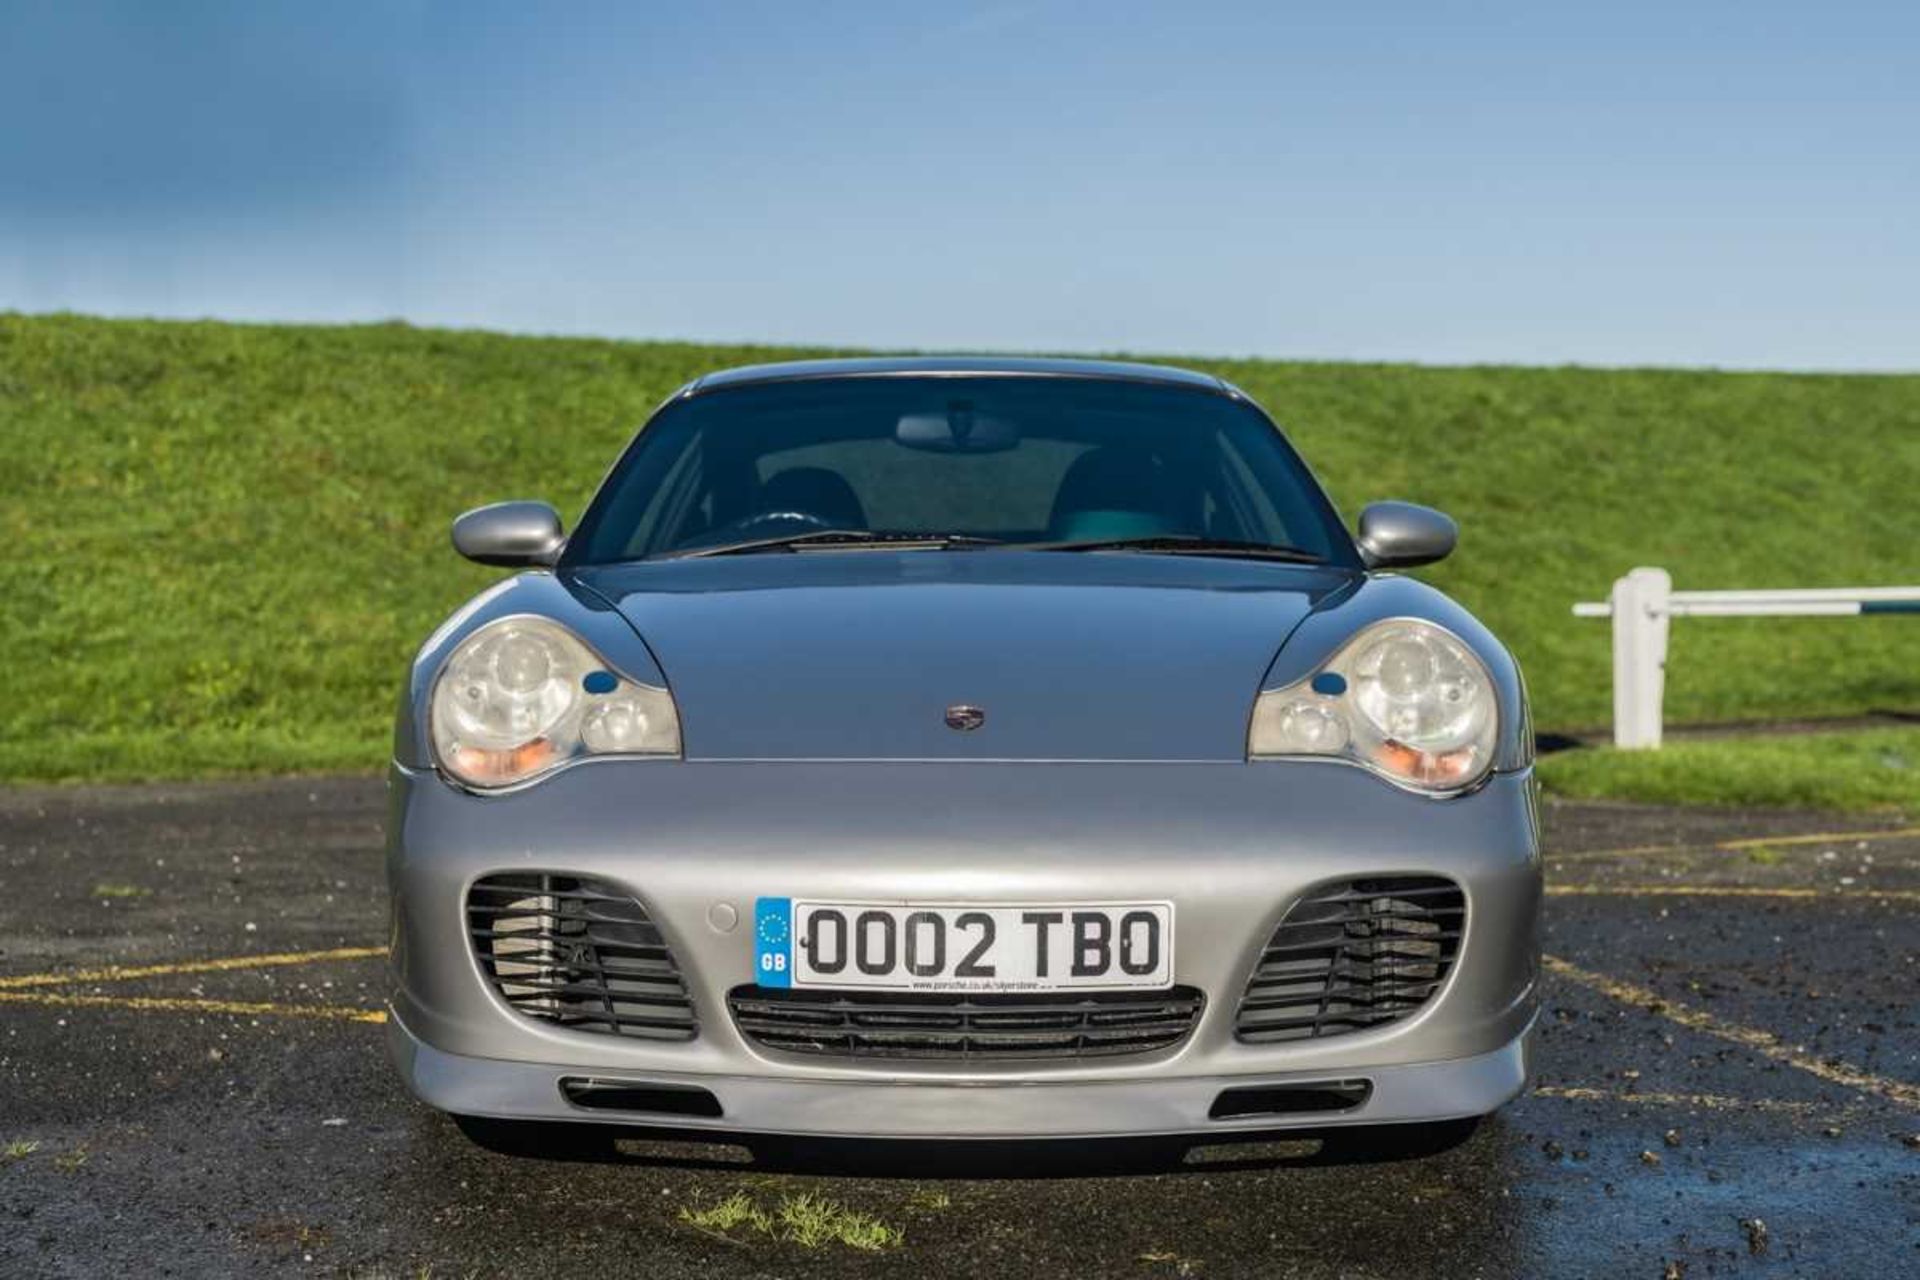 2002 Porsche 911 Turbo Specified with factory Aero-kit, sunroof and manual transmission  - Image 3 of 58